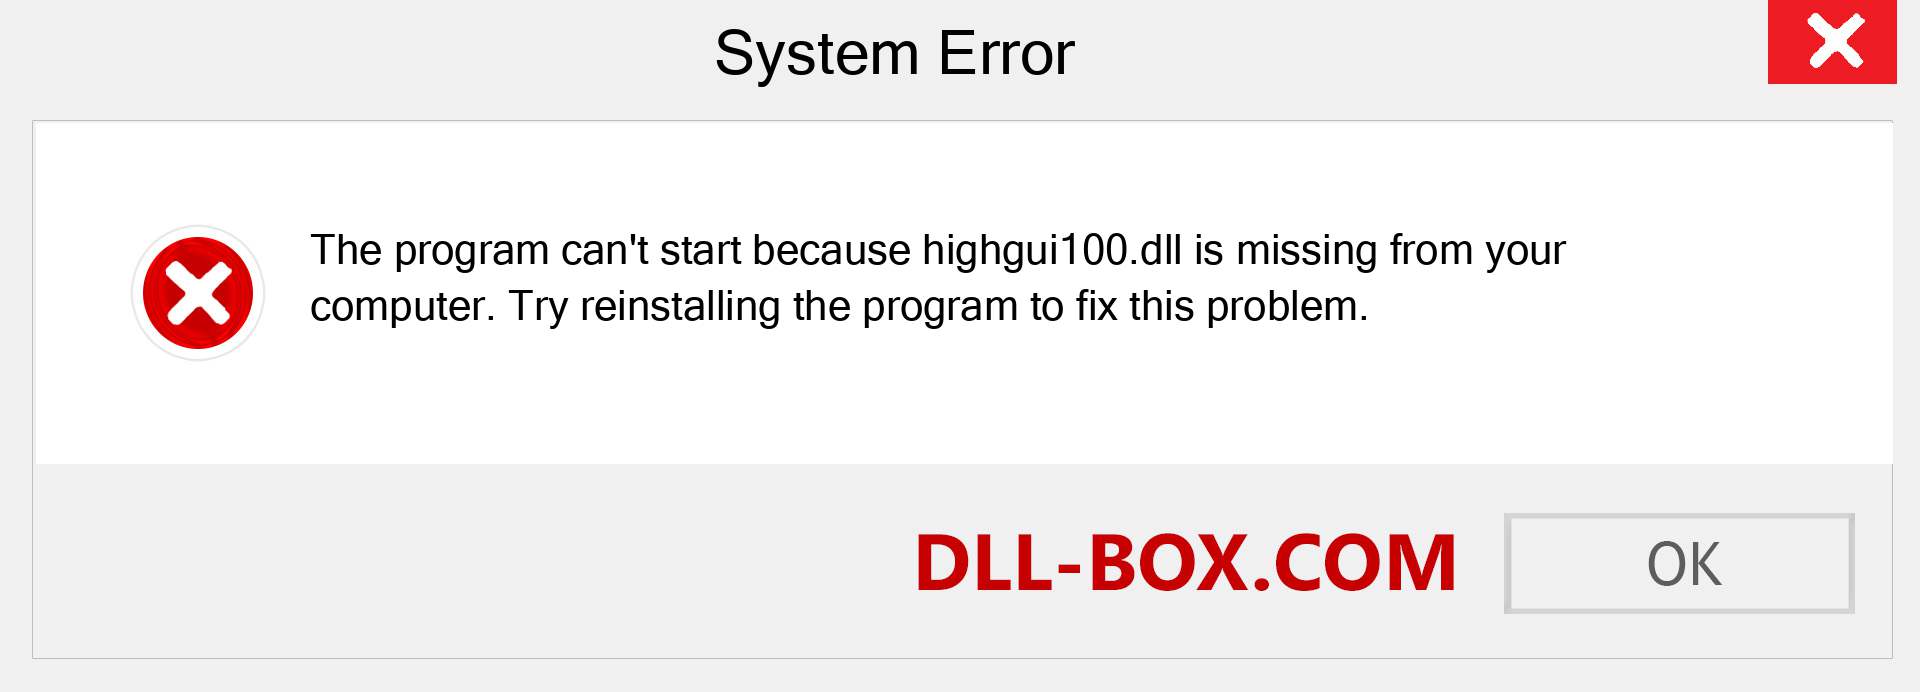  highgui100.dll file is missing?. Download for Windows 7, 8, 10 - Fix  highgui100 dll Missing Error on Windows, photos, images